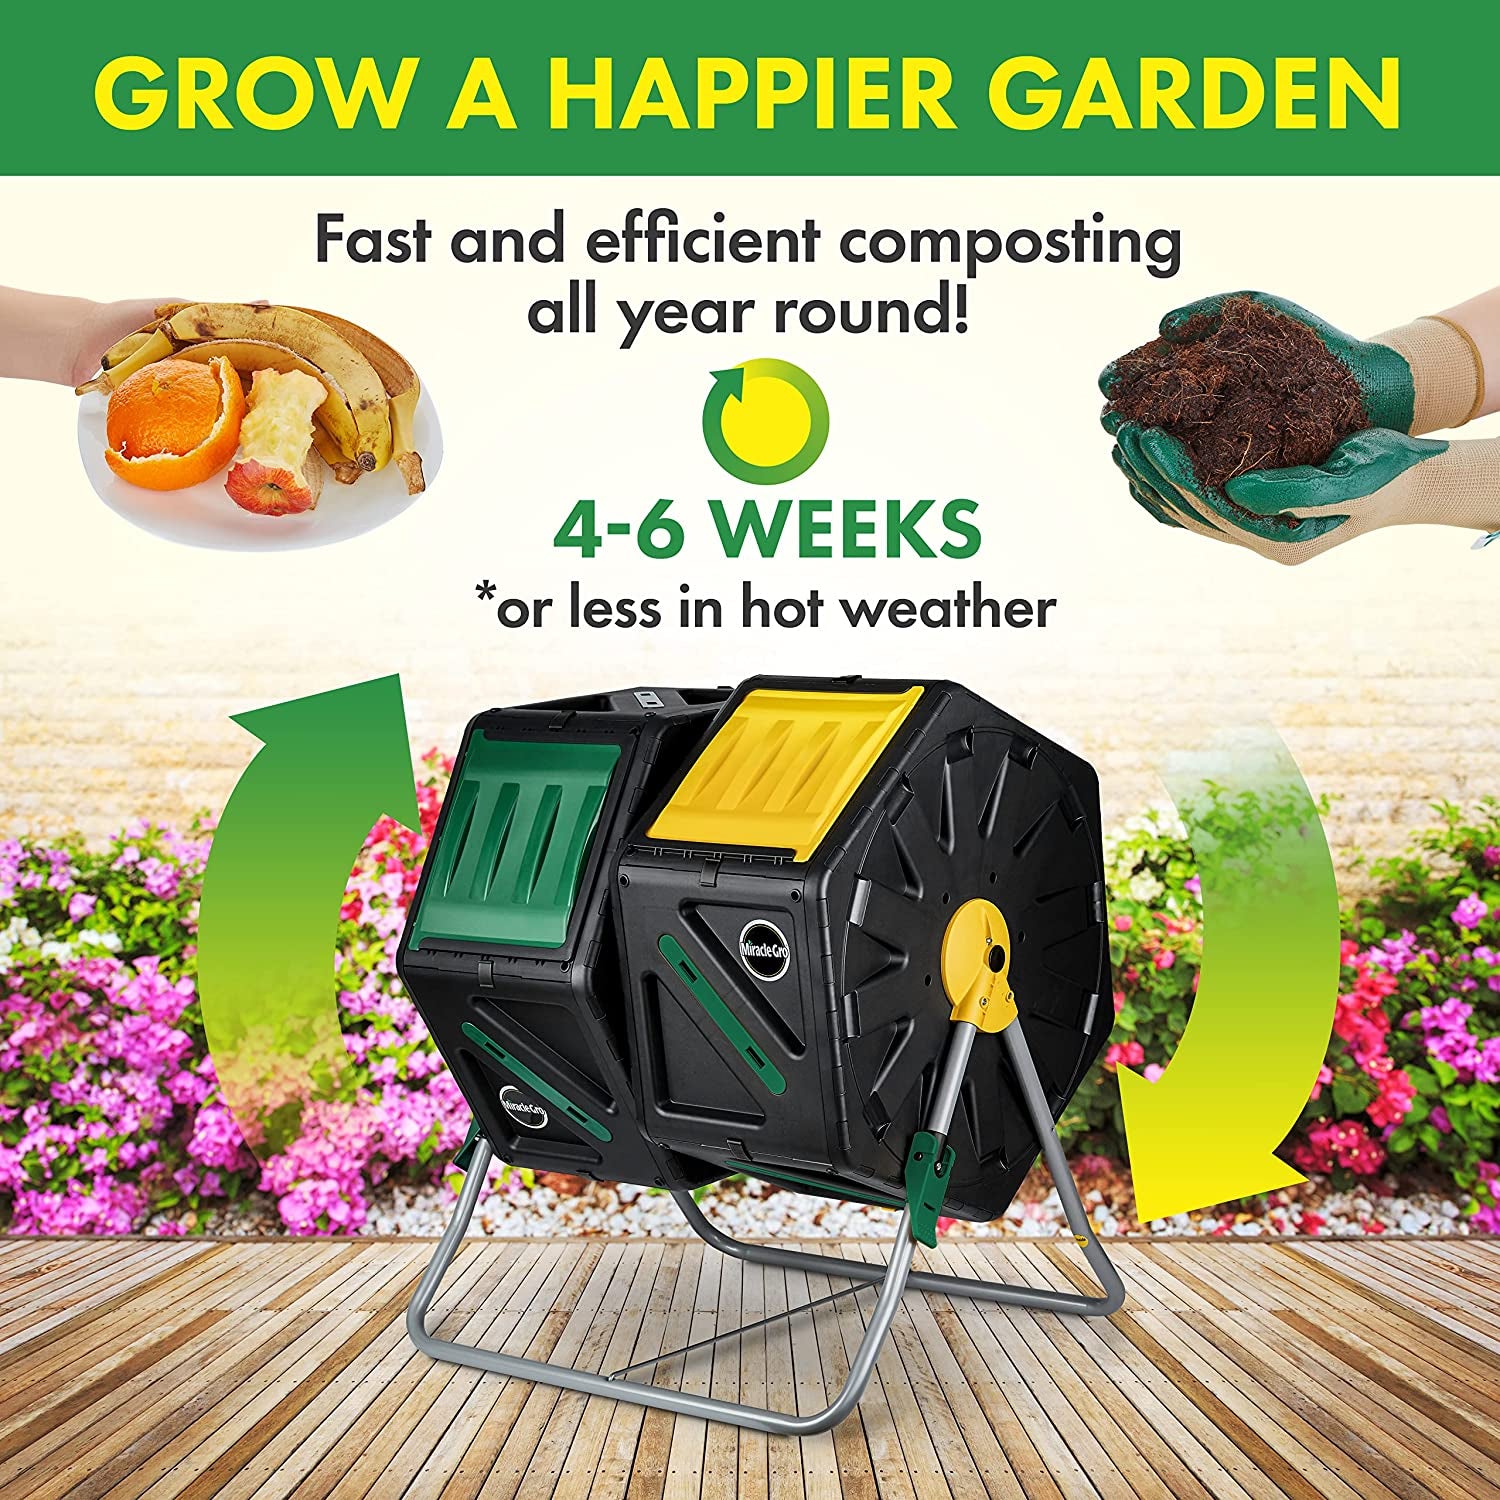 Dual Chamber Compost Tumbler – Easy-Turn, Fast-Working System – All-Season, Heavy-Duty, High Volume Composter with 2 Sliding Doors - (2 – 18.5Gallon /70 Liter)